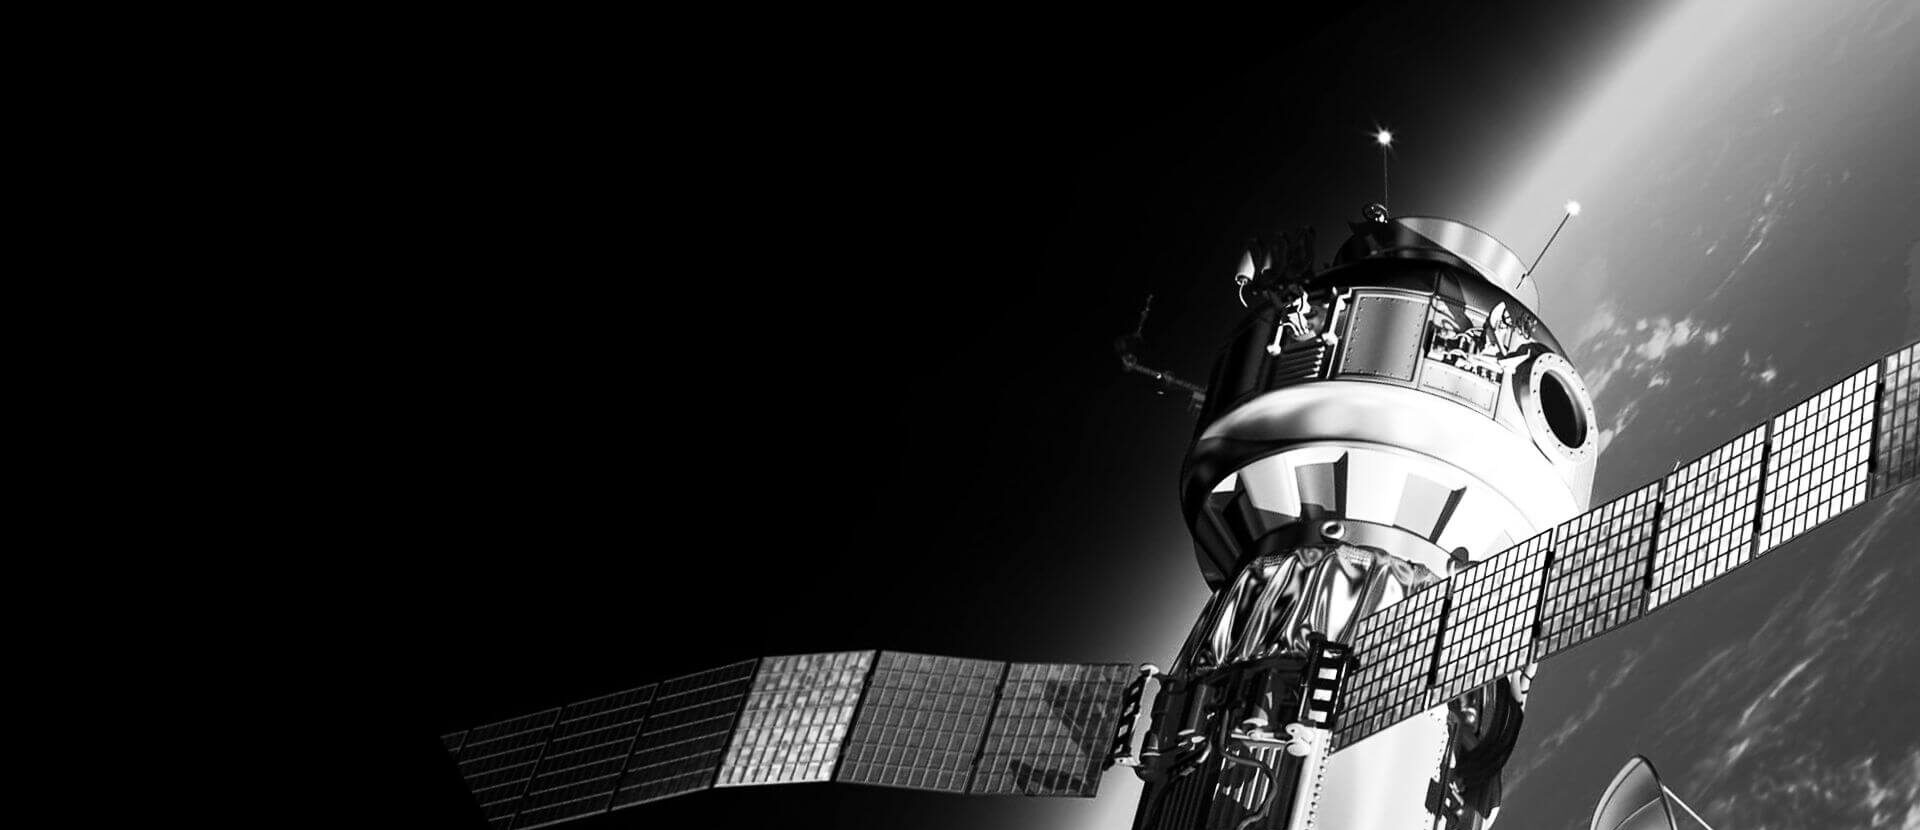 black and white image of a satellite in space